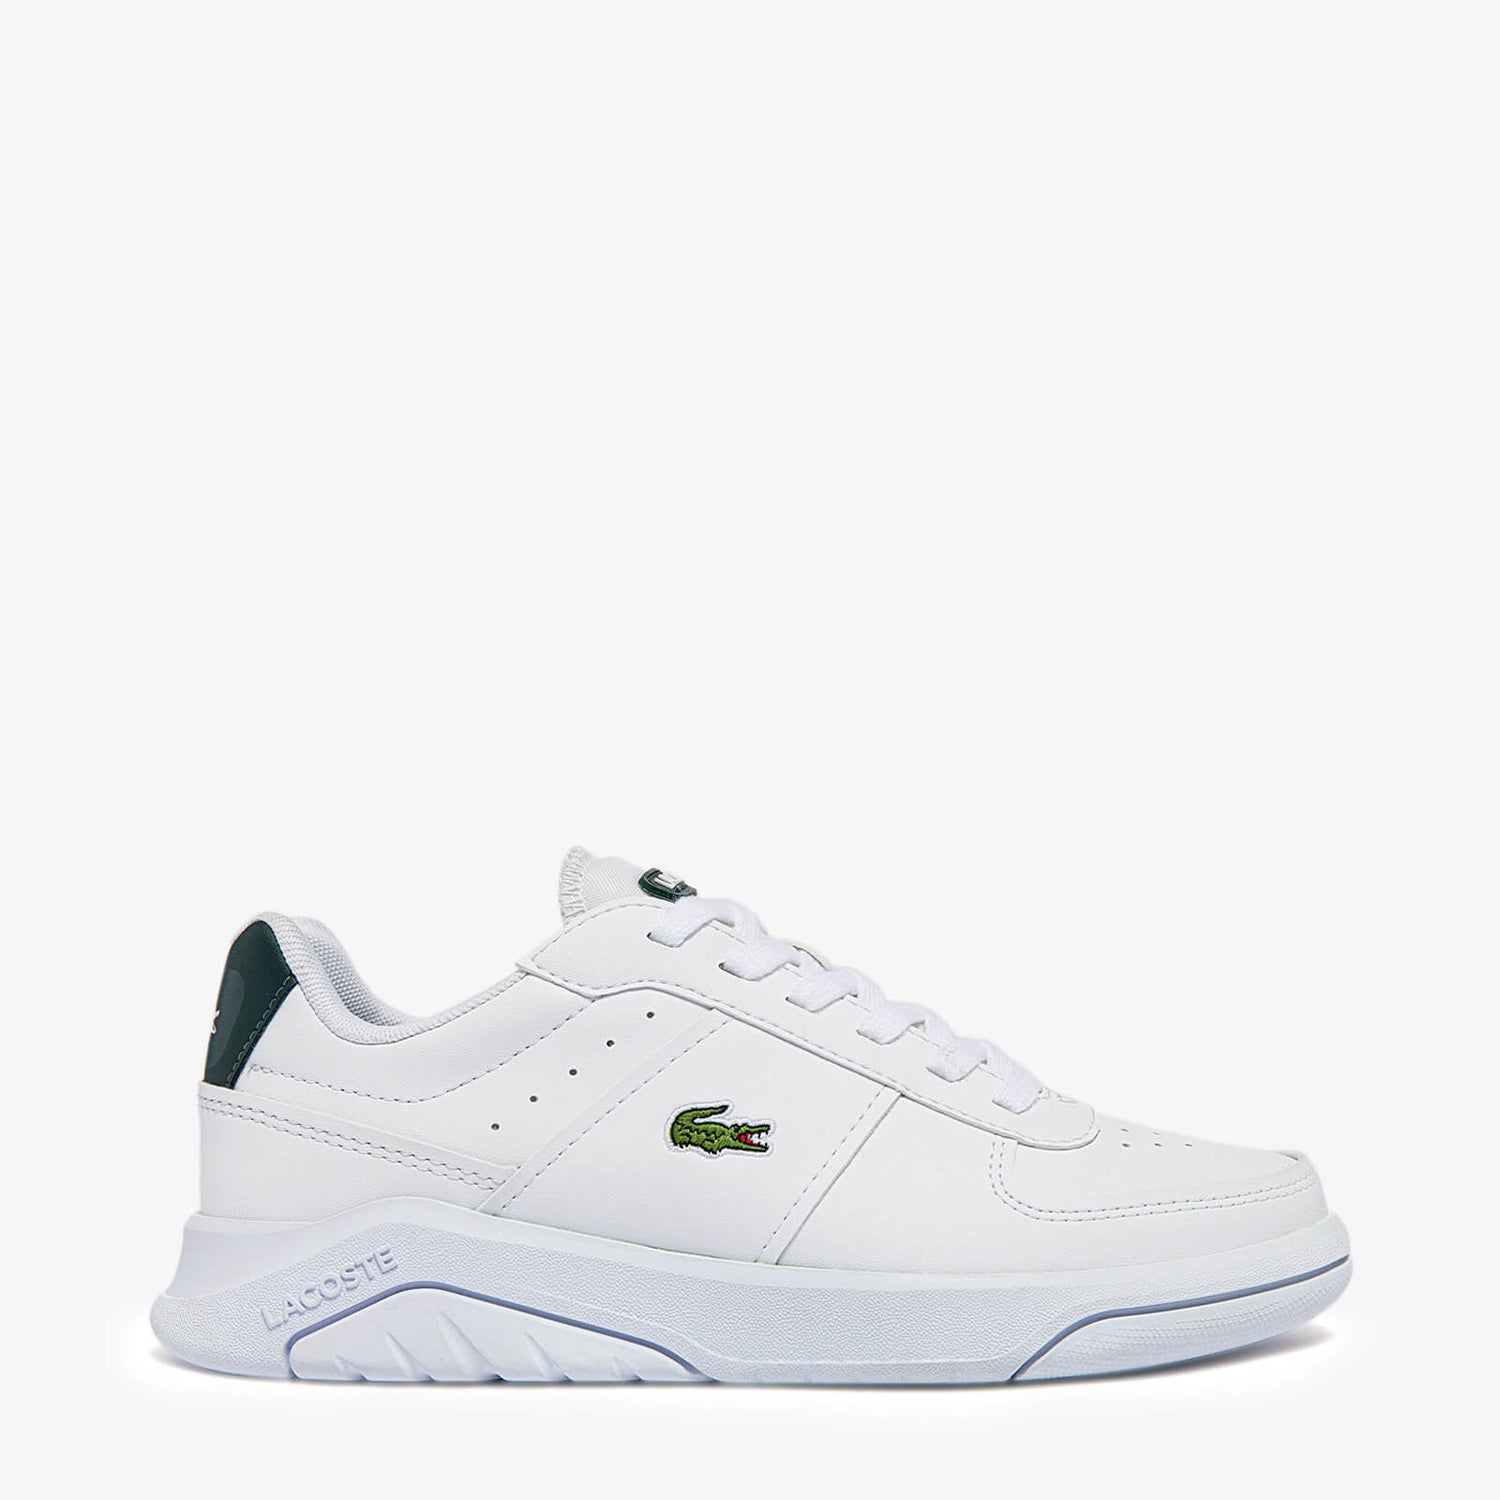 Lacoste Junior Game Advance Trainers - White/Green - UK 2 Kids